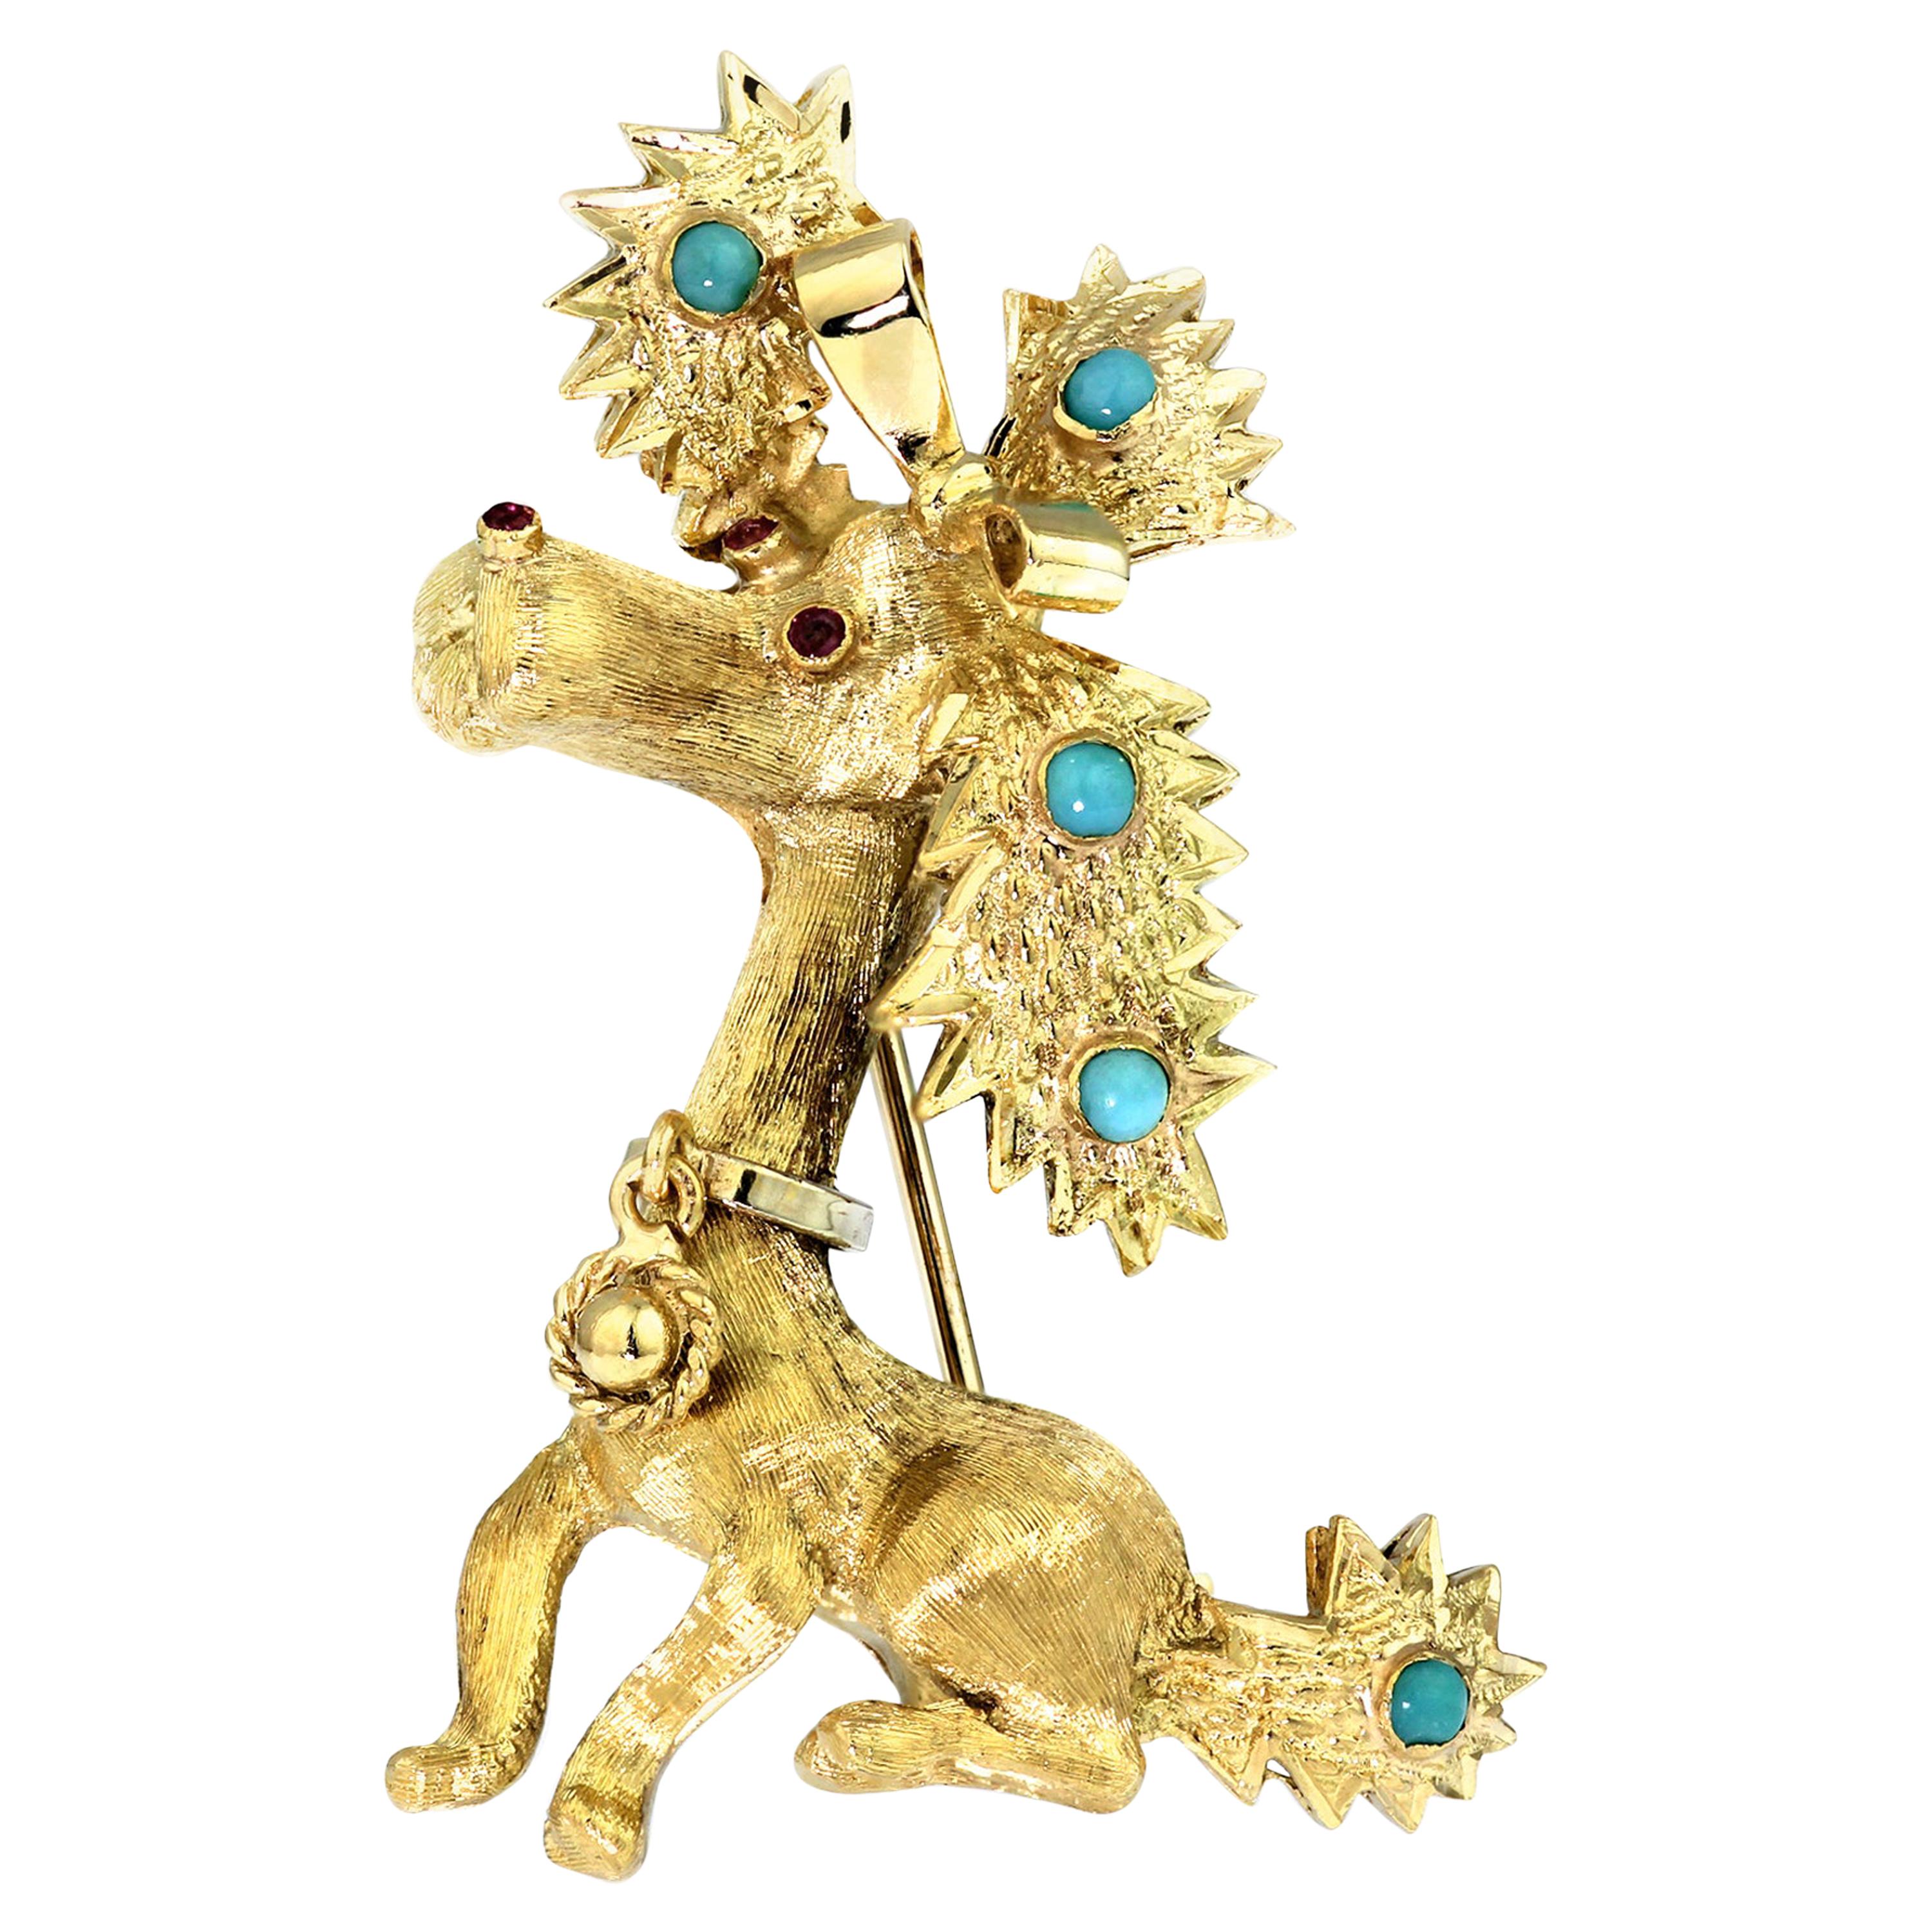 Retro 1960s Stylized 3D Poodle /Puppy /Dog Pin / Brooch in 18 K Gold & Turquoise